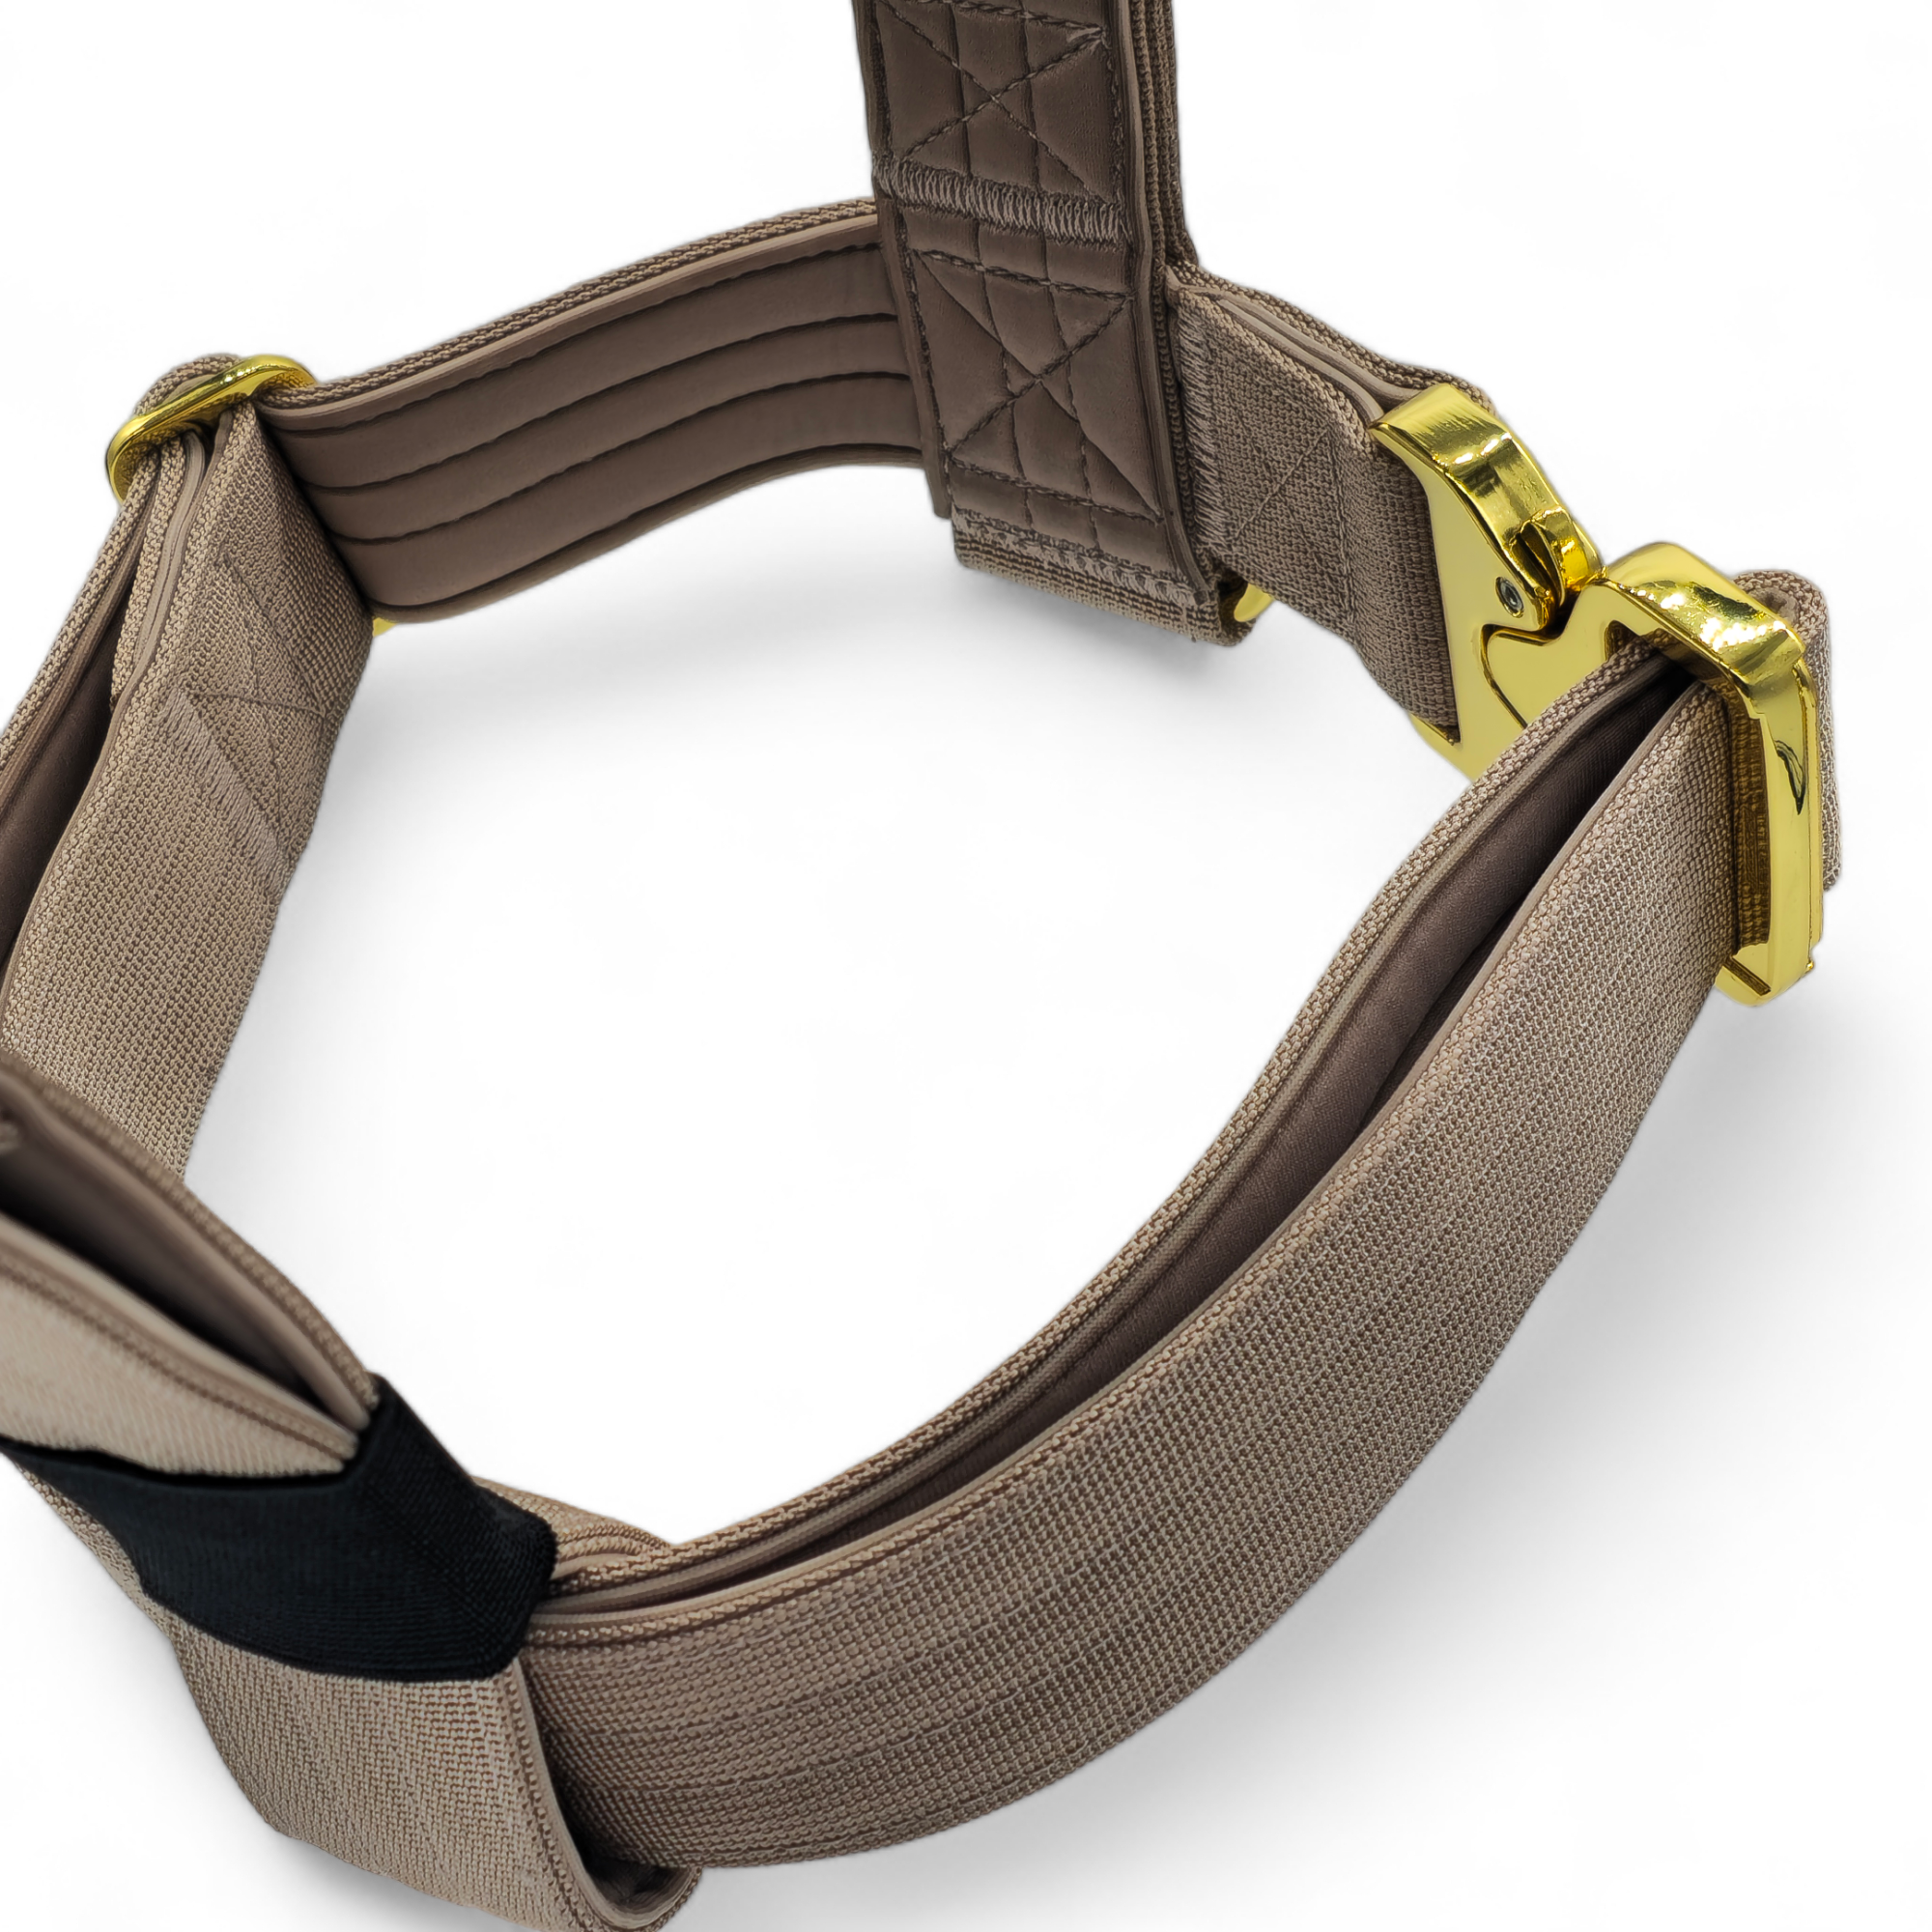 Anti-Pull Harness Military Tan | Quad Stitched Nylon Adjustable With Control Handle